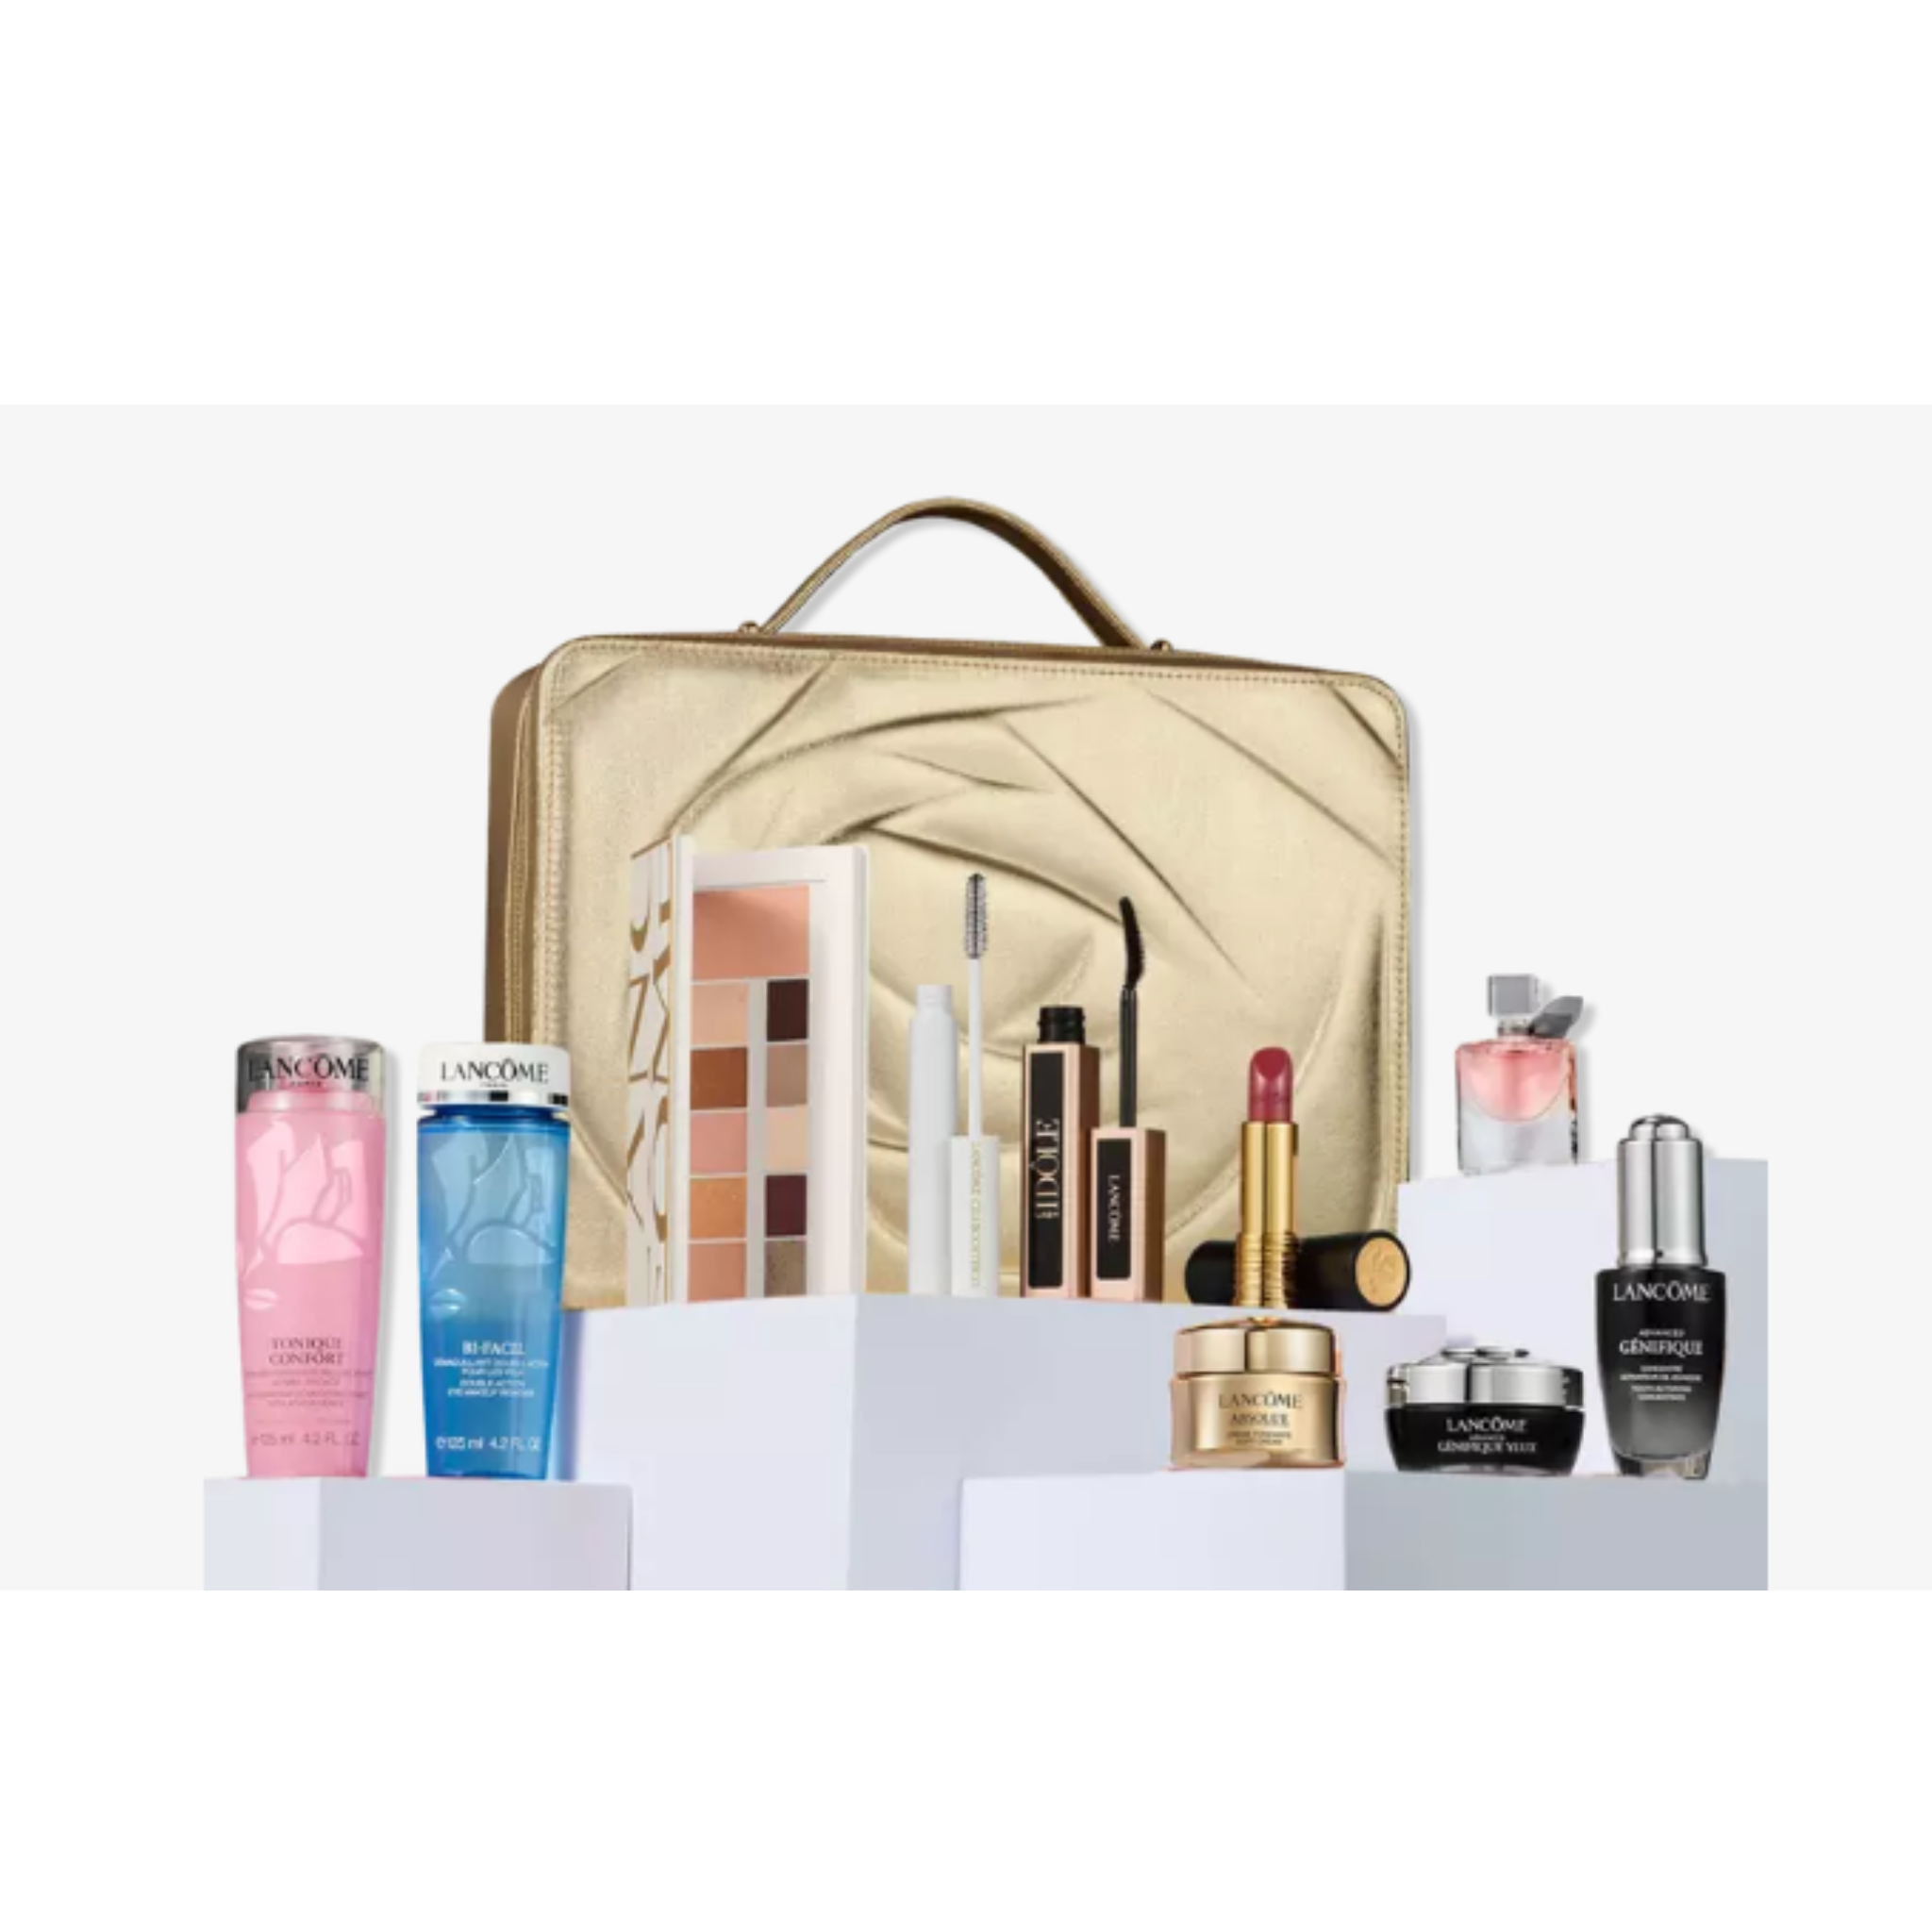 Lancome Beauty Box: 7 FULL SIZE + 3 DELUXE SAMPLES!